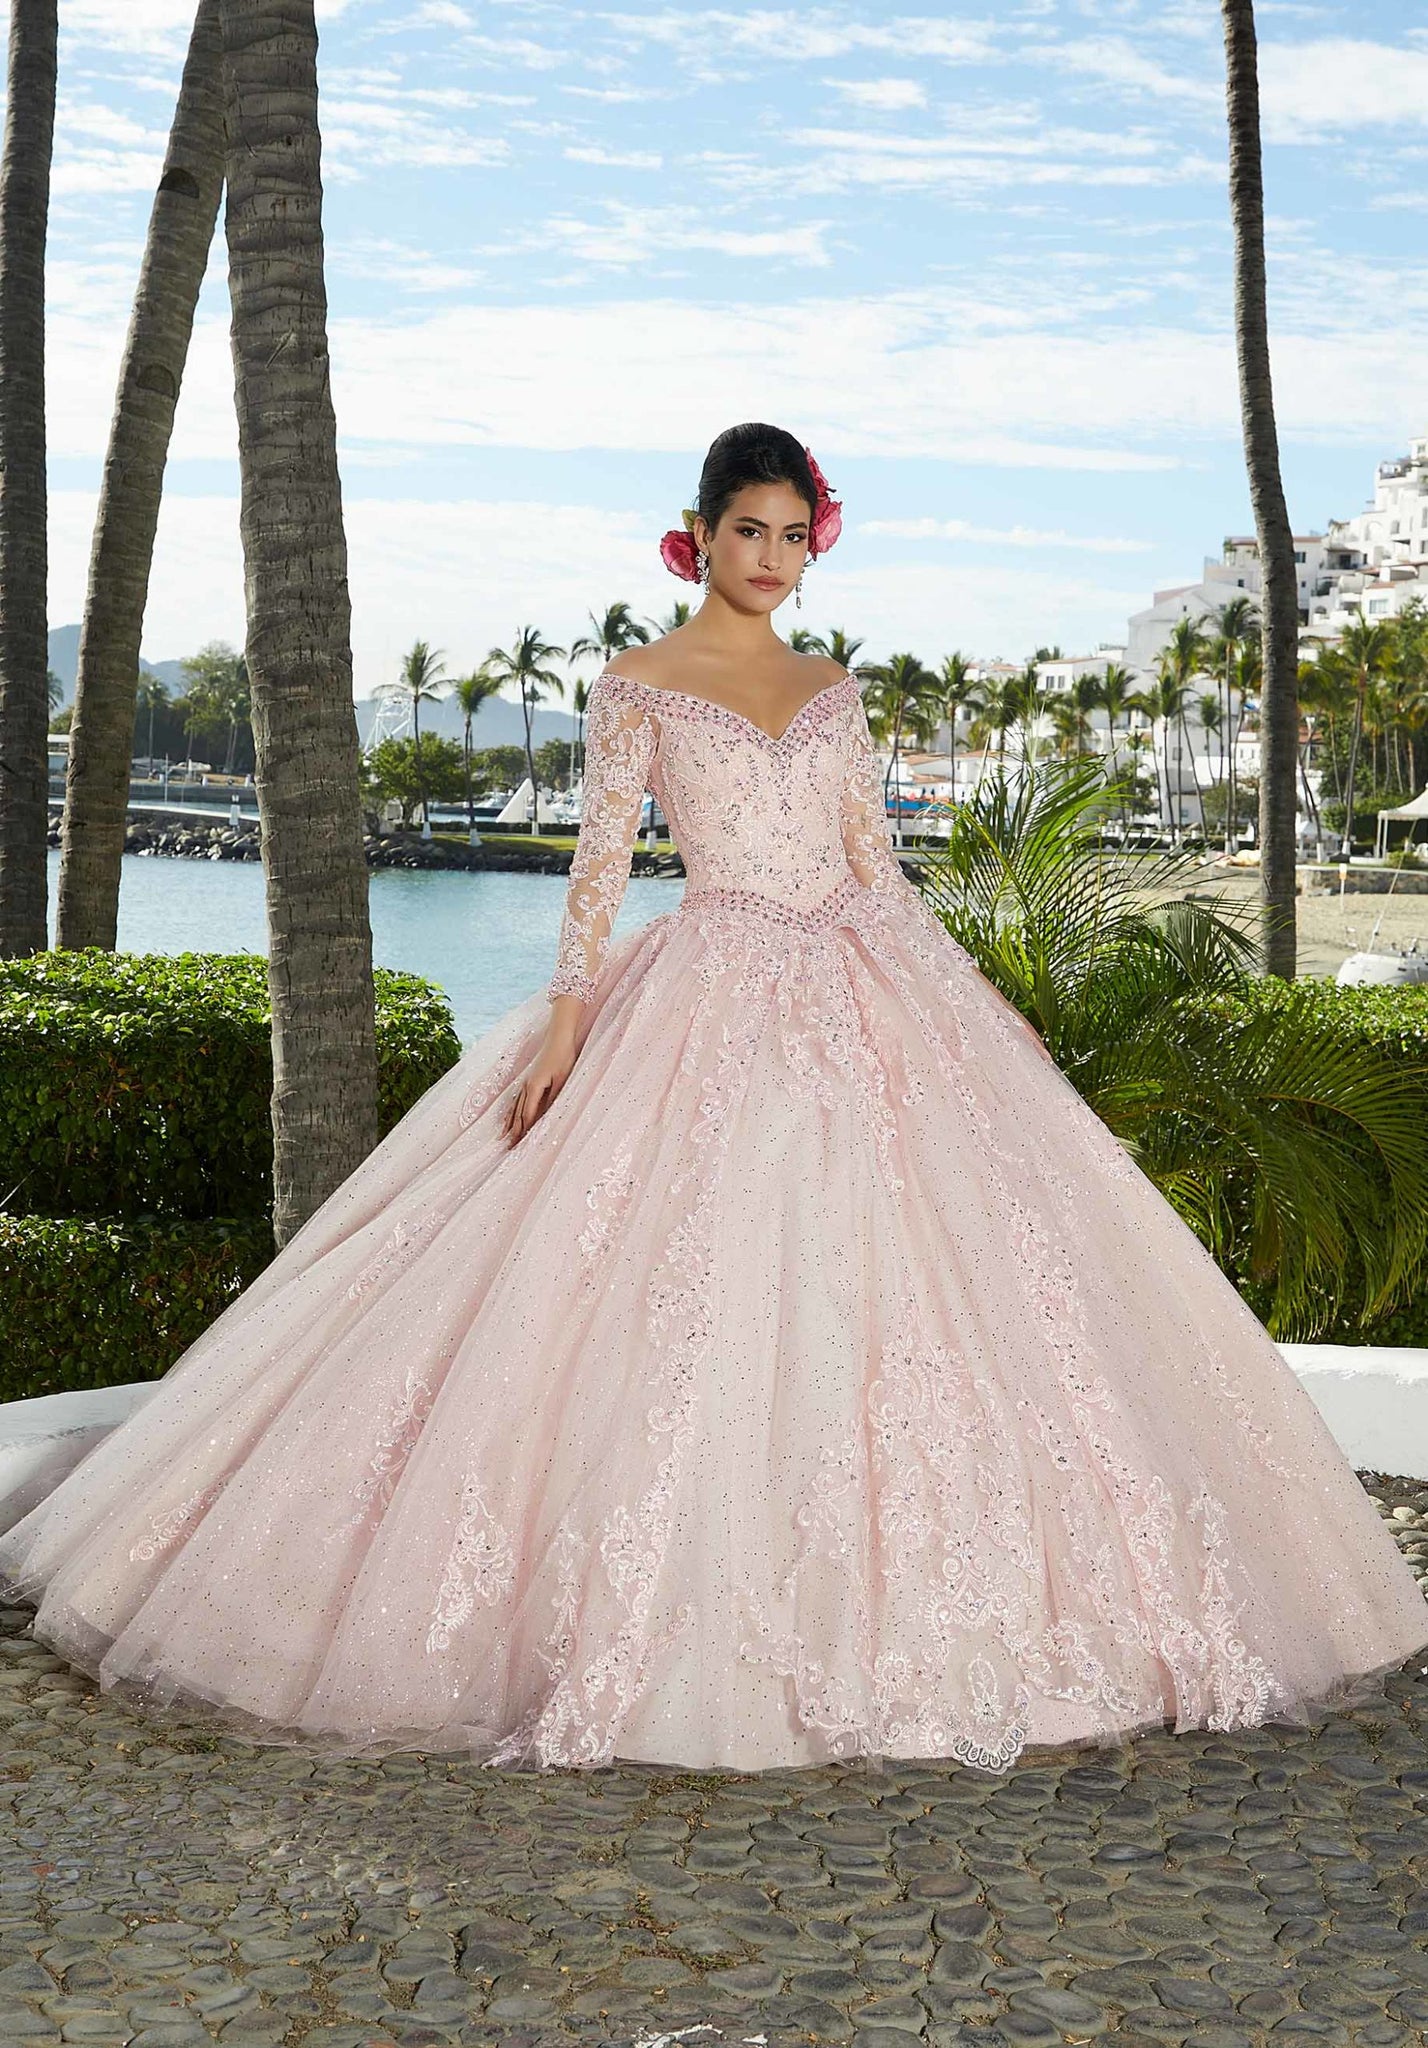 Sparkle Tulle Quinceañera Dress with Crystal Beaded Trim